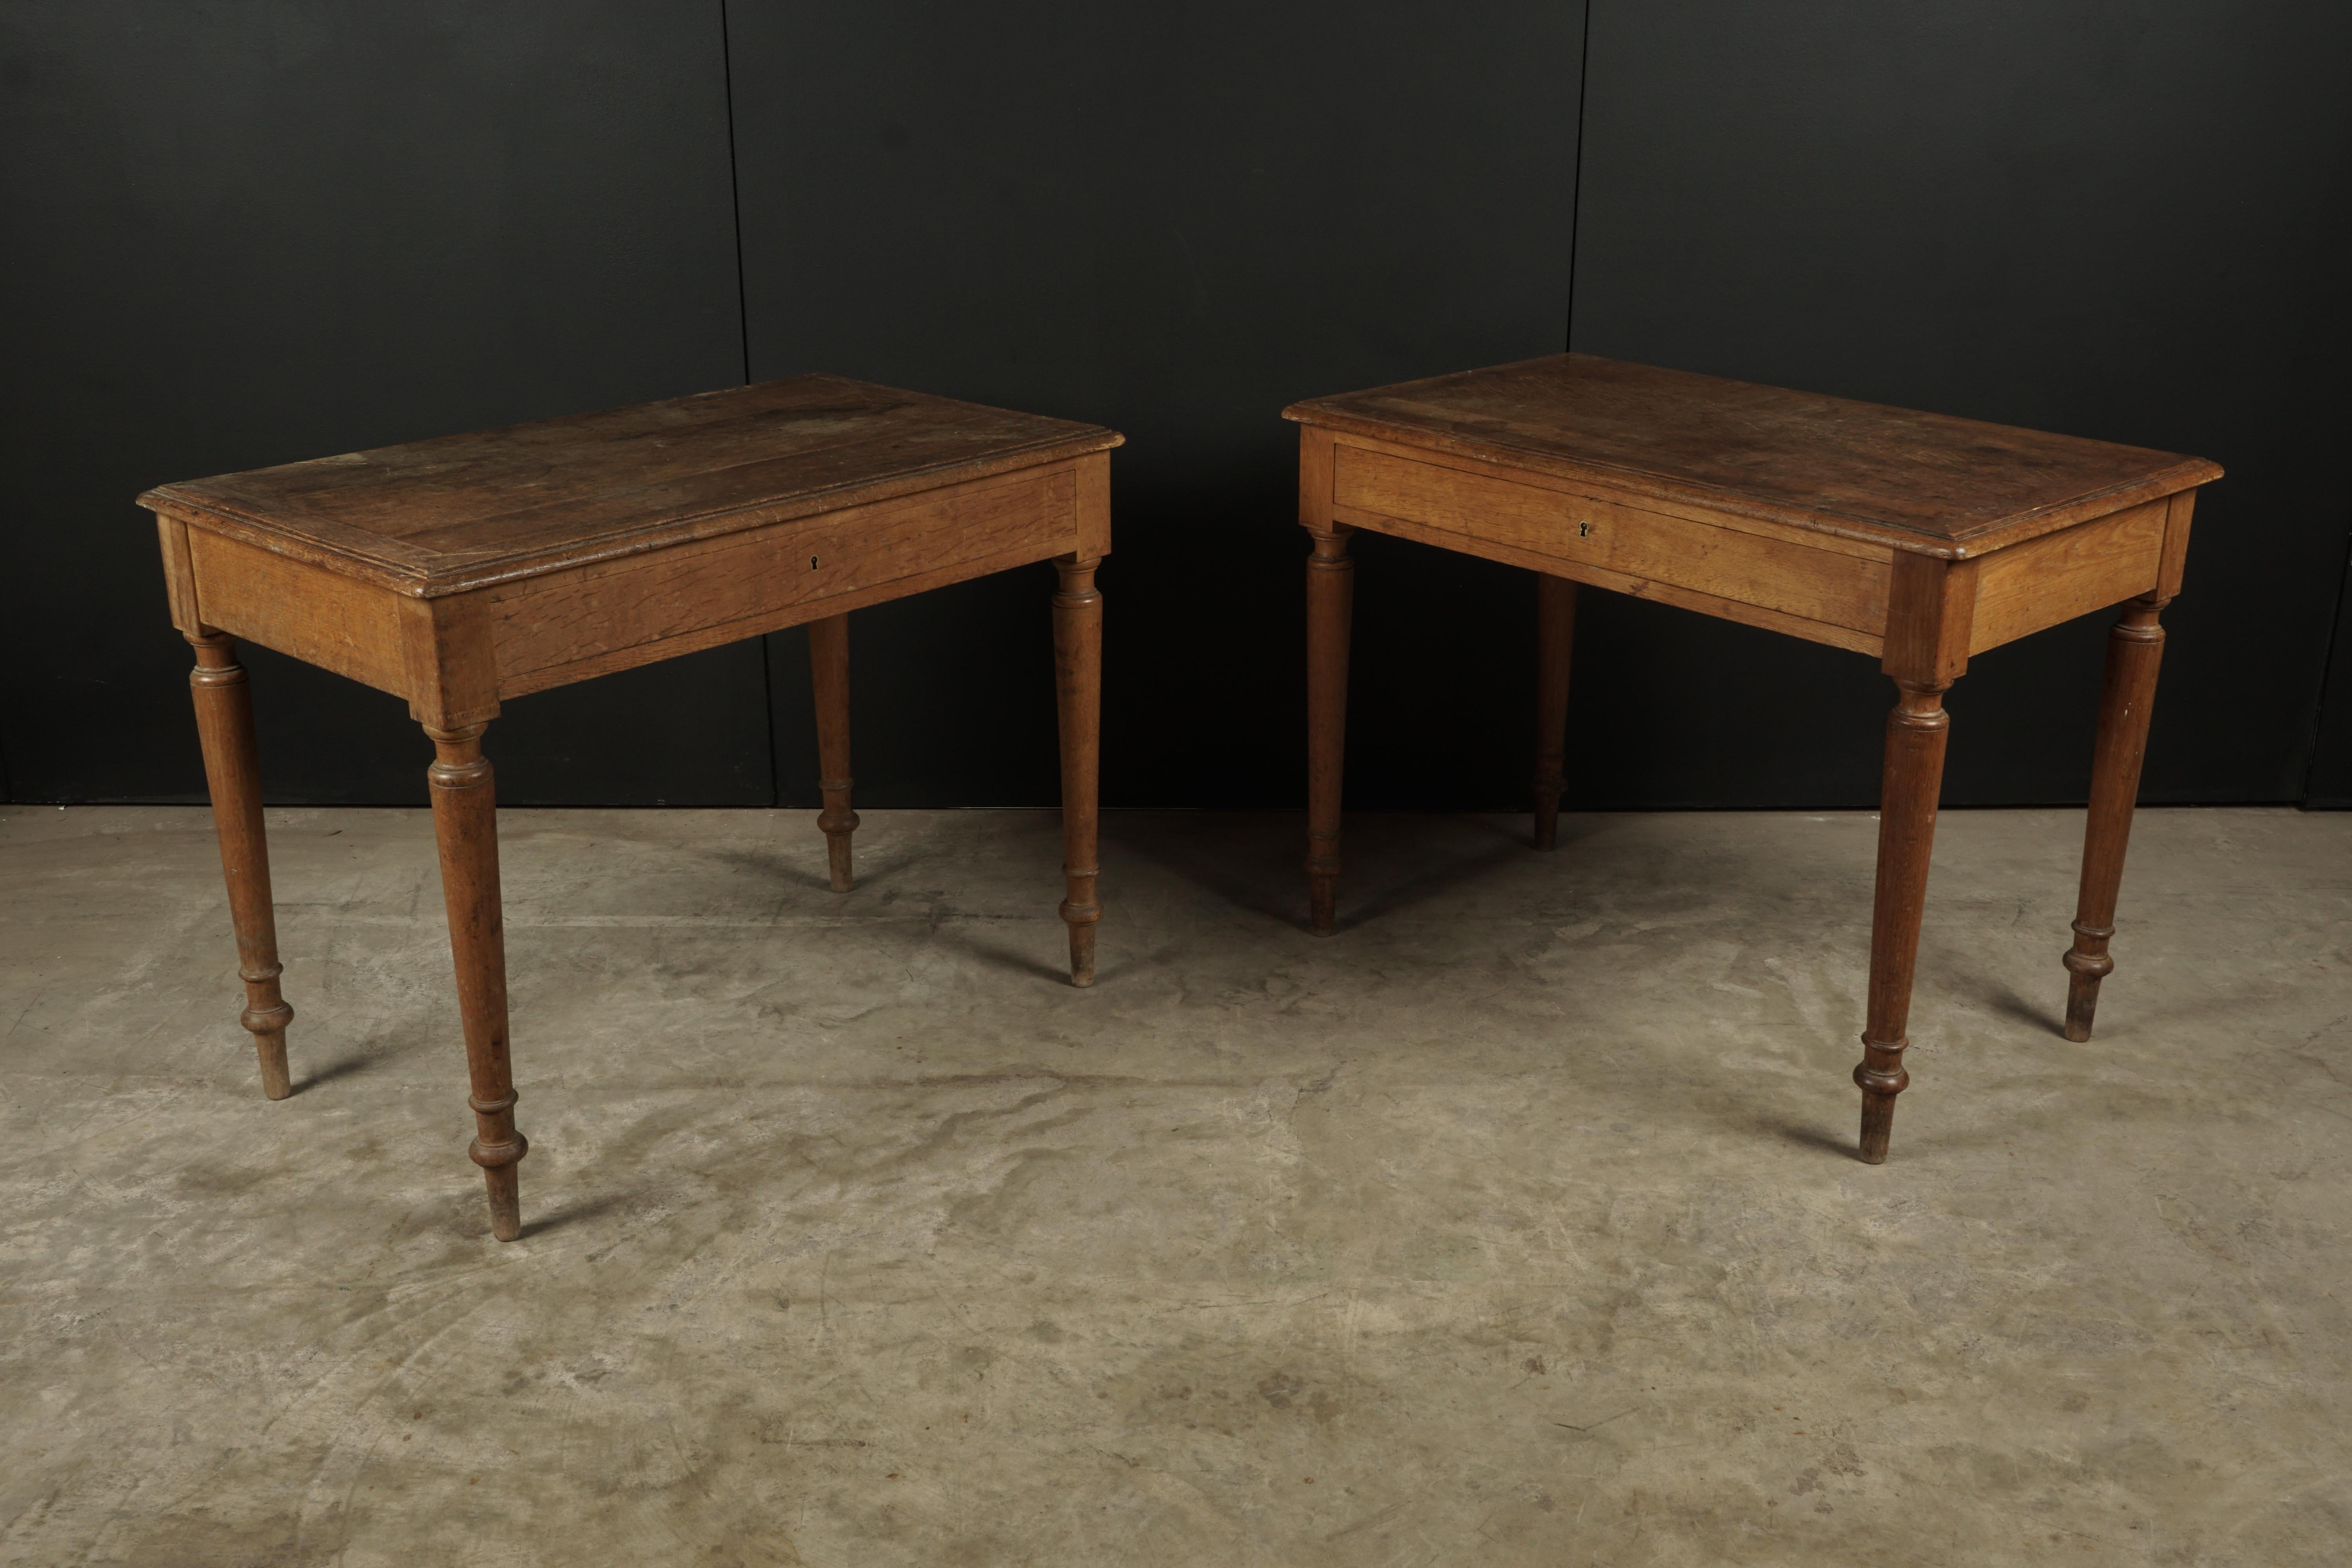 Pair of oak bistro tables from France, circa 1950. Solid oak construction with nice patina and wear.